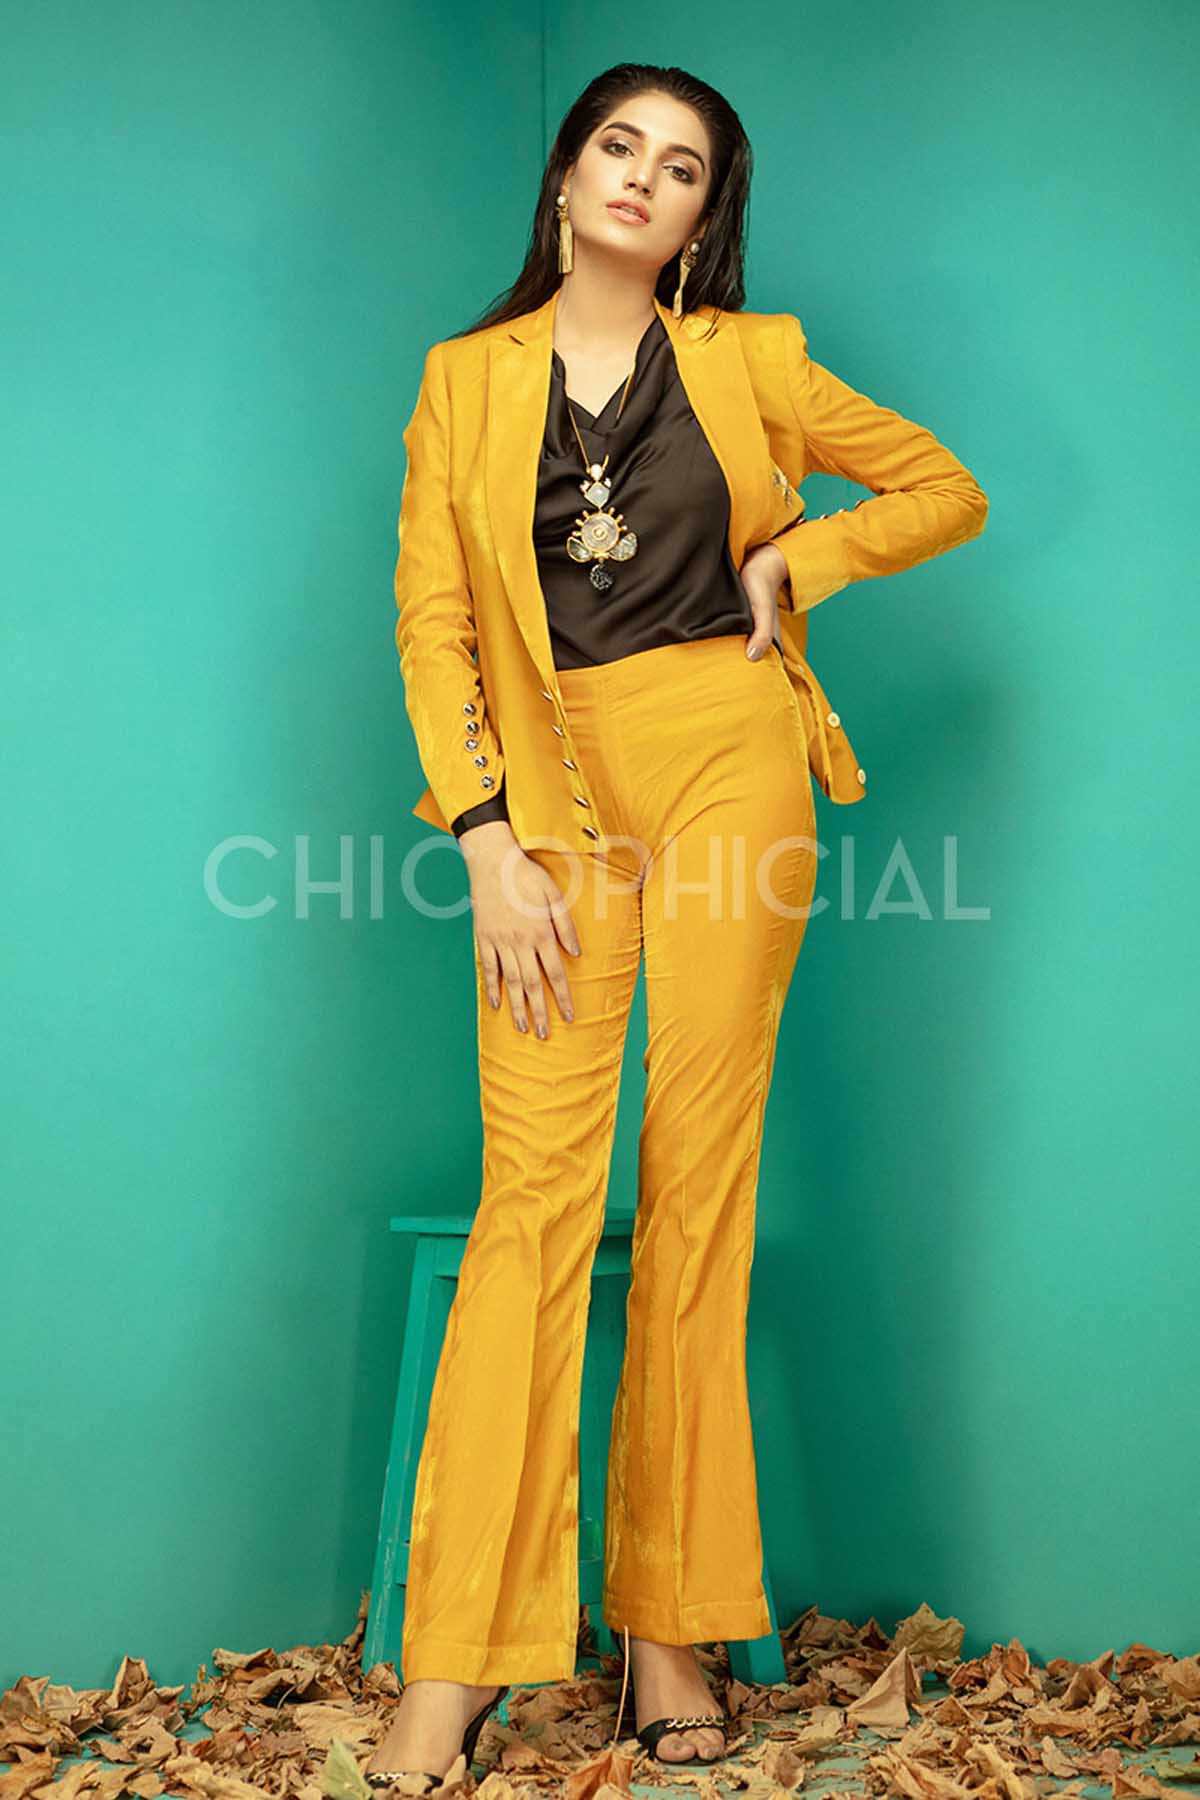 Yellow Sapphire Wrap Style Blazer - Chic Ophicial